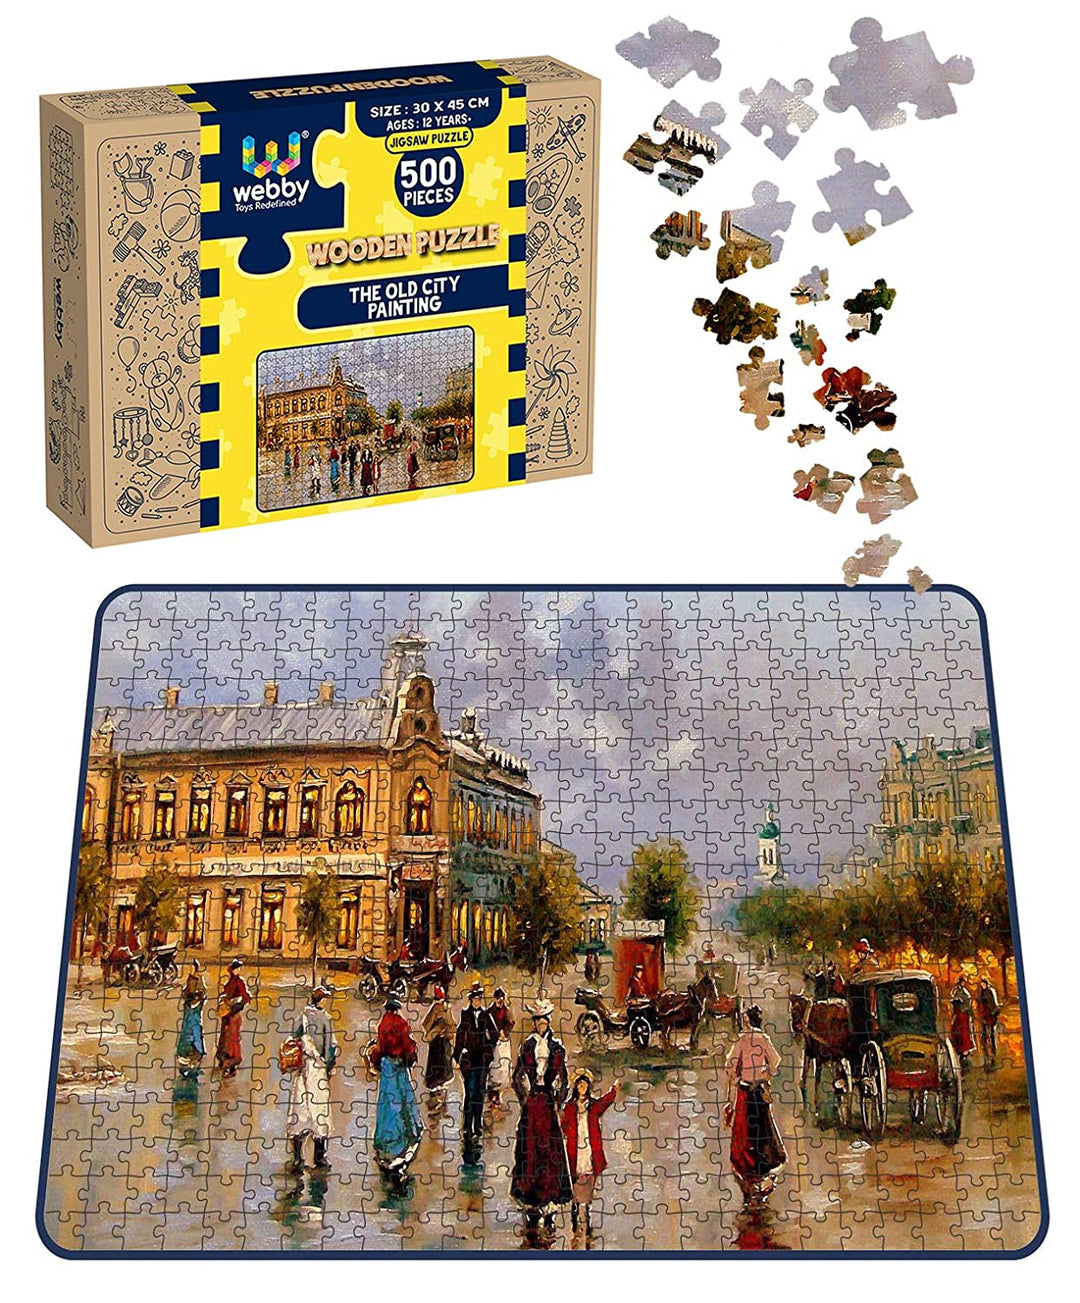 Webby The Old City Painting Wooden Jigsaw Puzzle, 500 pieces